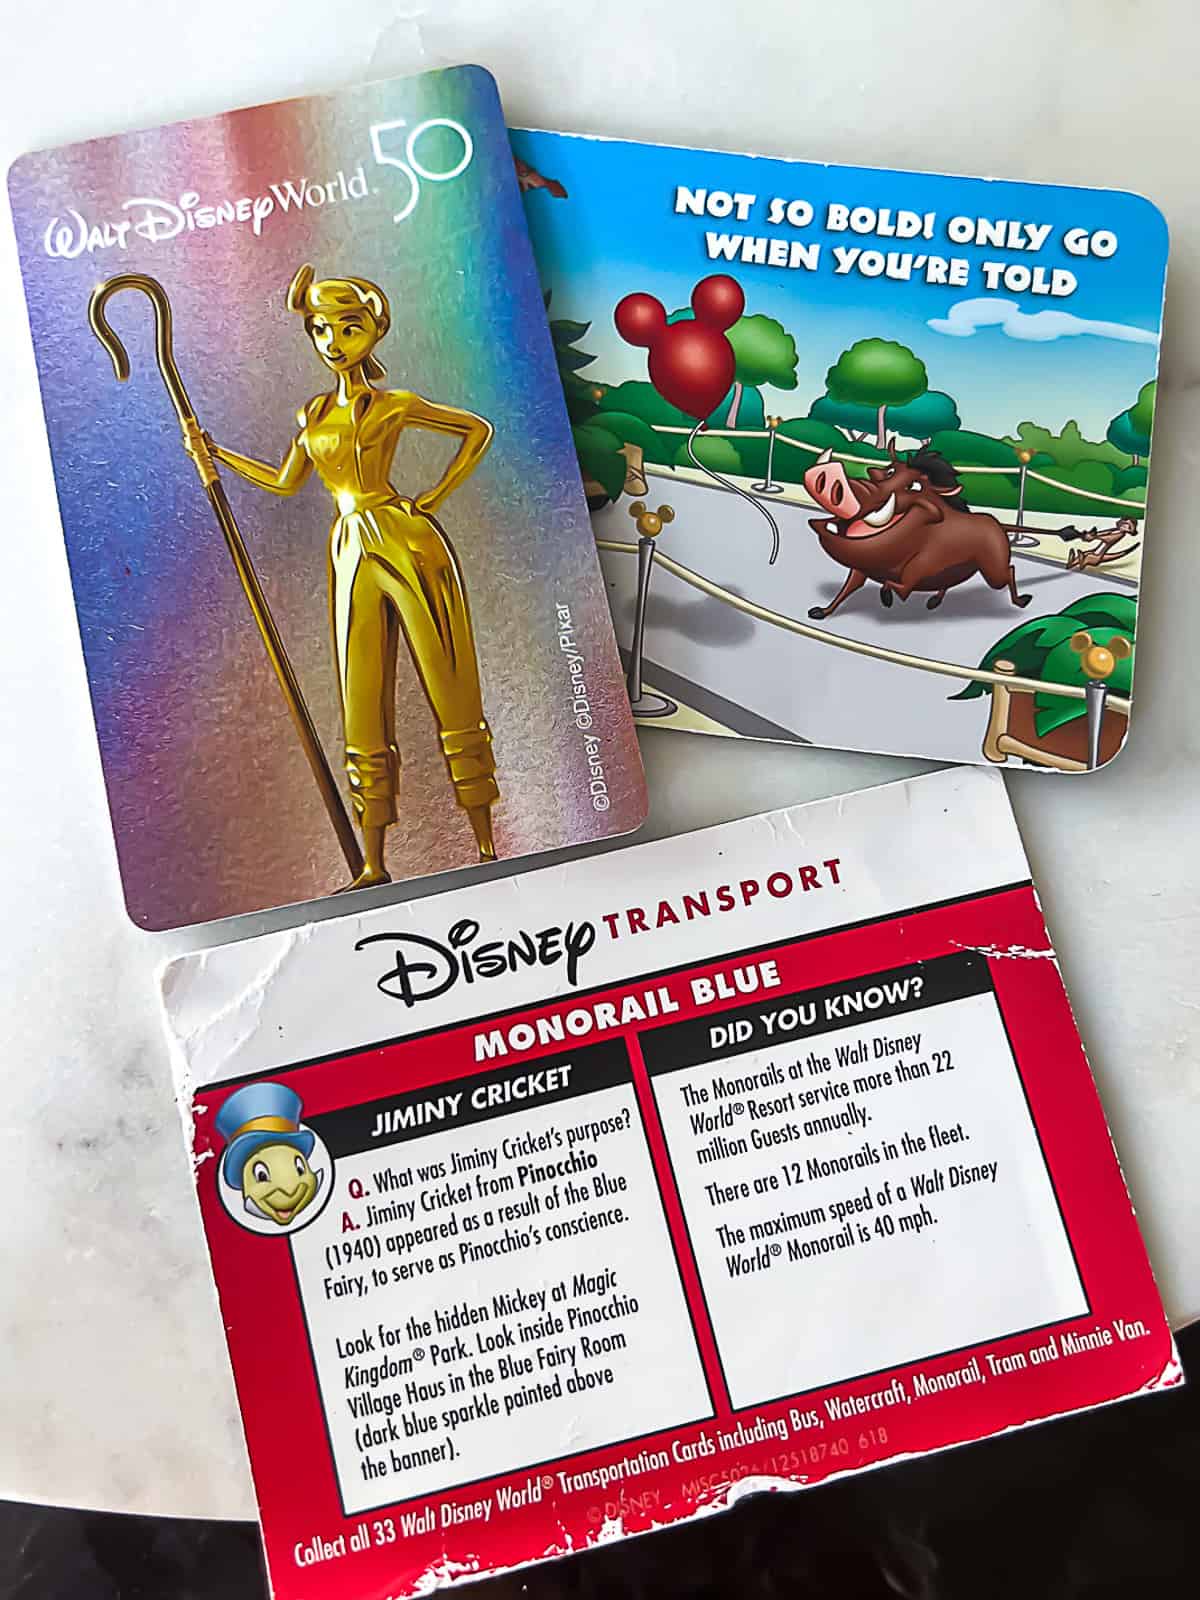 Disney World park tickets from Vacation Package